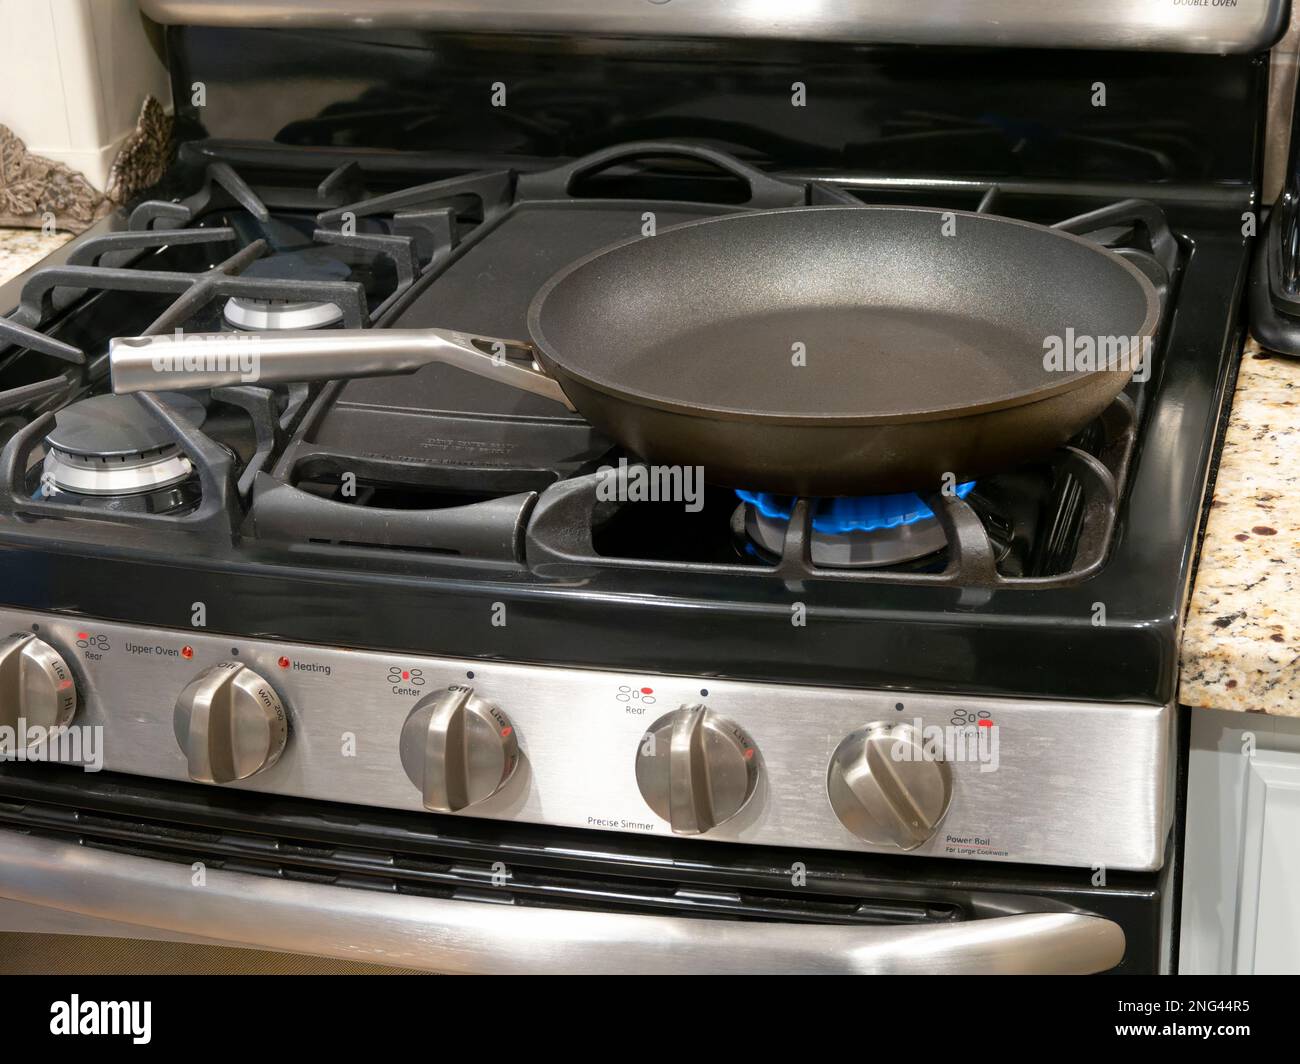 https://c8.alamy.com/comp/2NG44R5/empty-skillet-or-frying-pan-for-cooking-on-a-gas-stove-or-stovetop-in-a-home-in-the-usa-2NG44R5.jpg